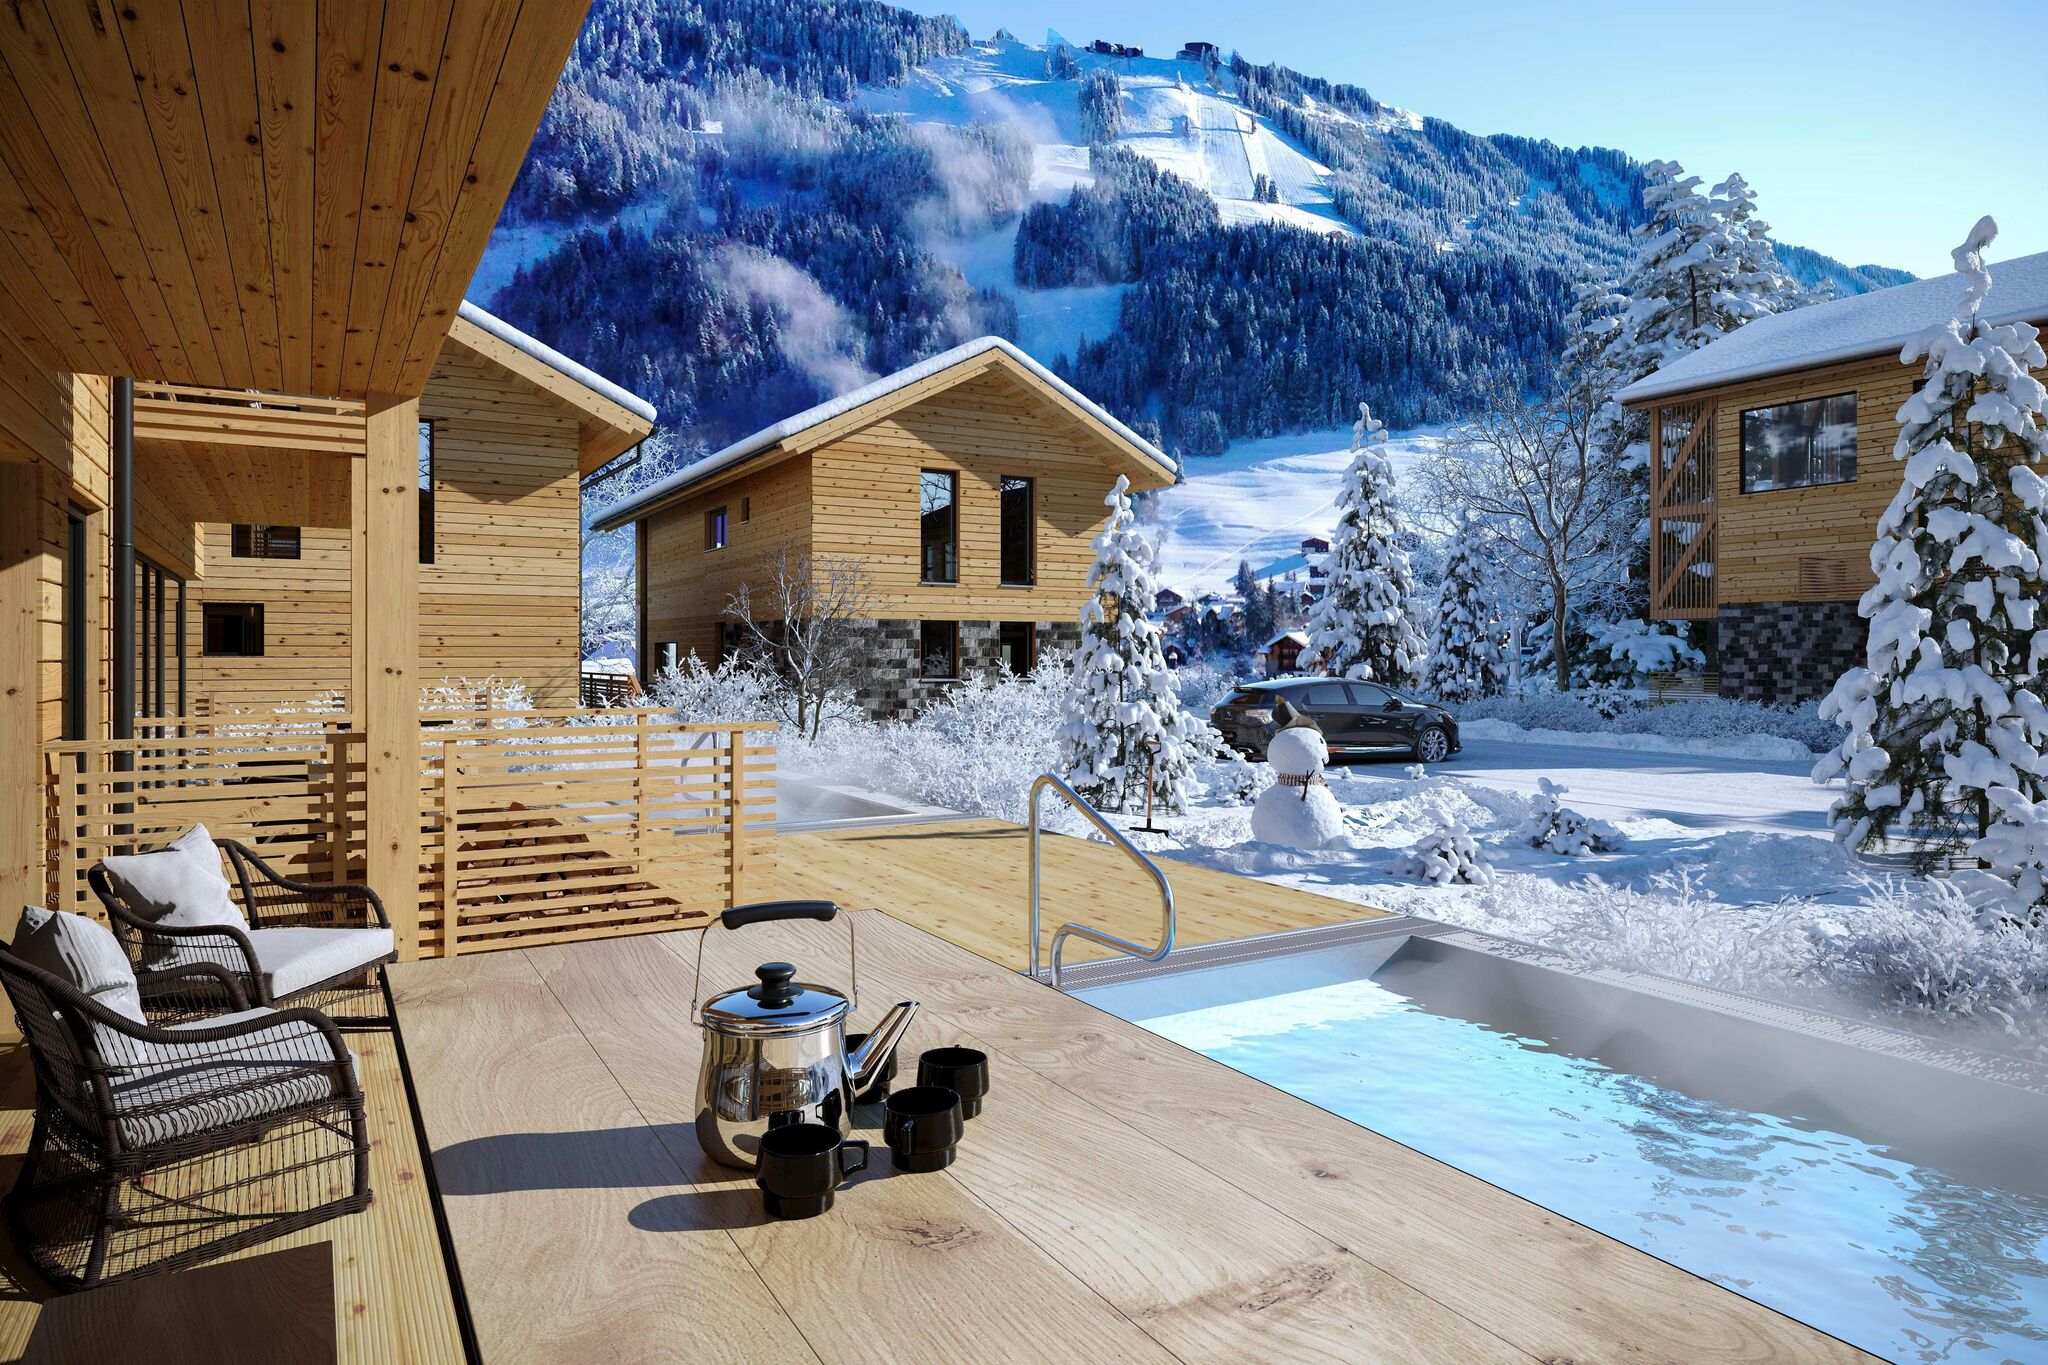 Holiday home with private pool and sauna